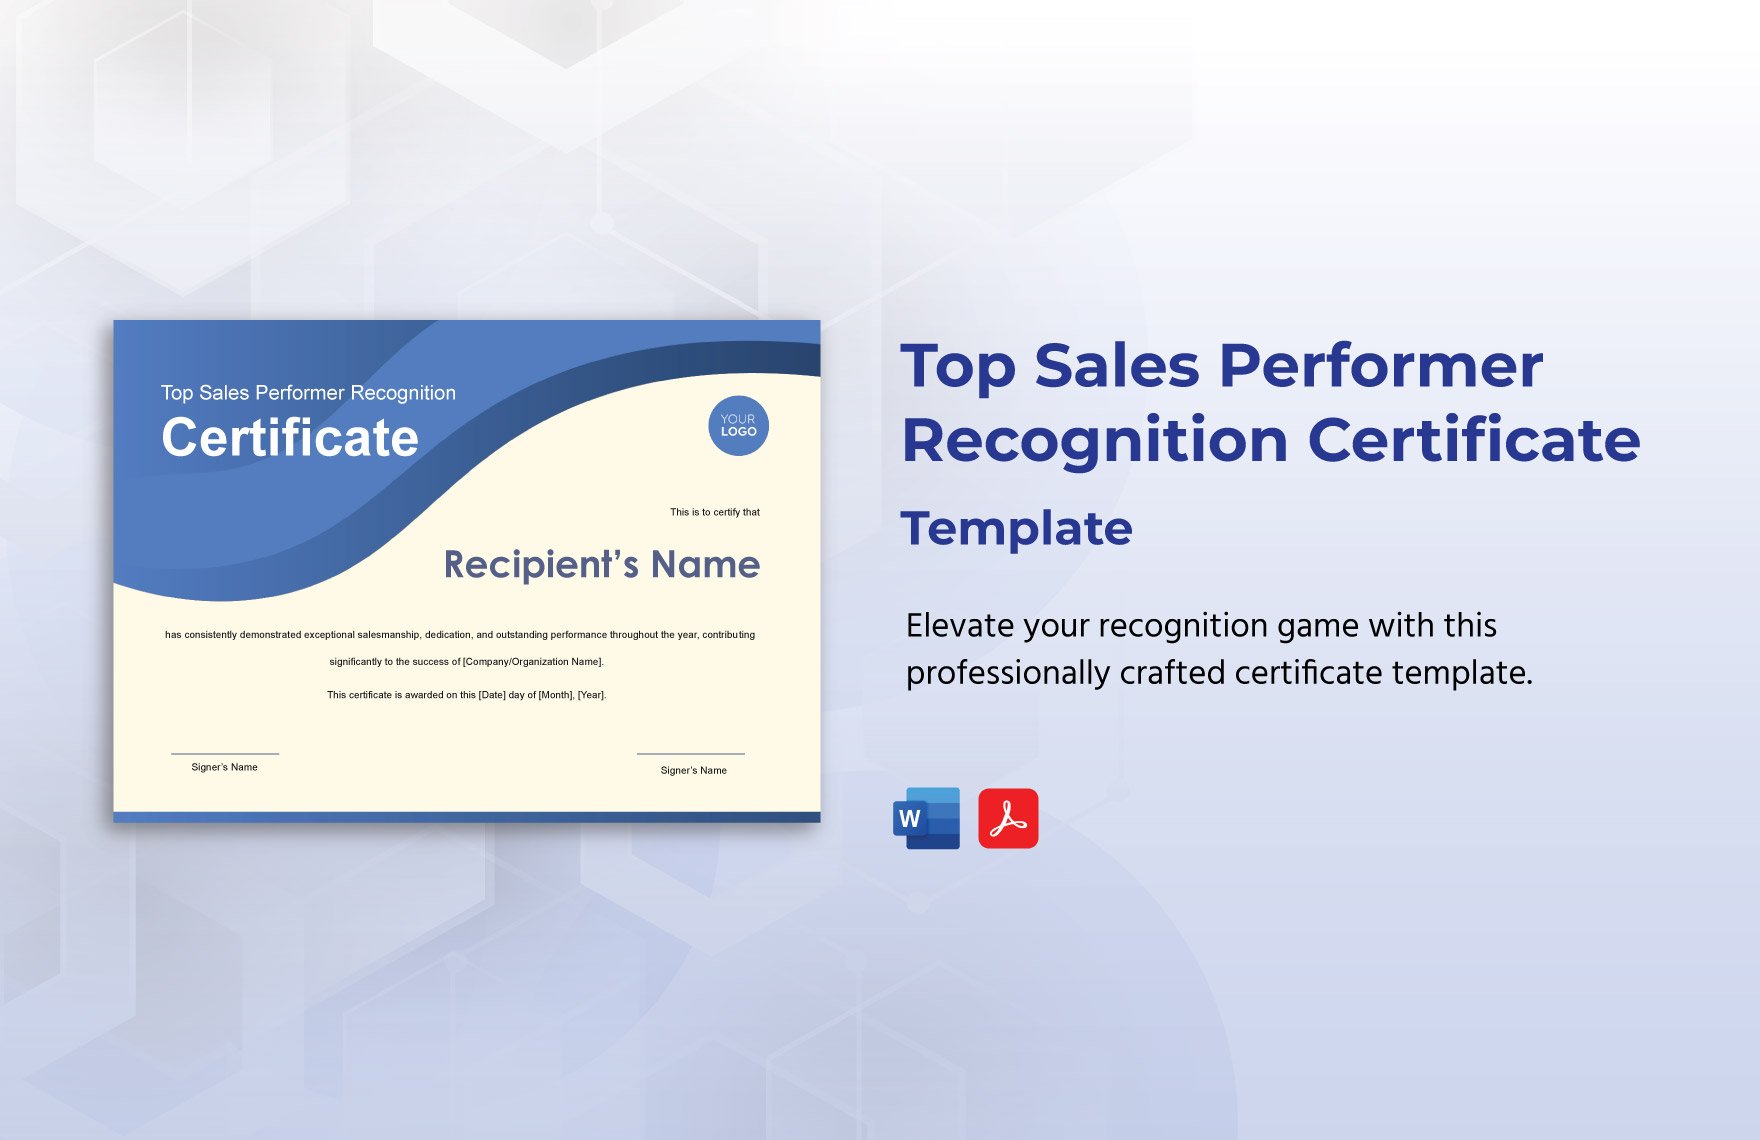 Top Sales Performer Recognition Certificate Template in Word, PDF